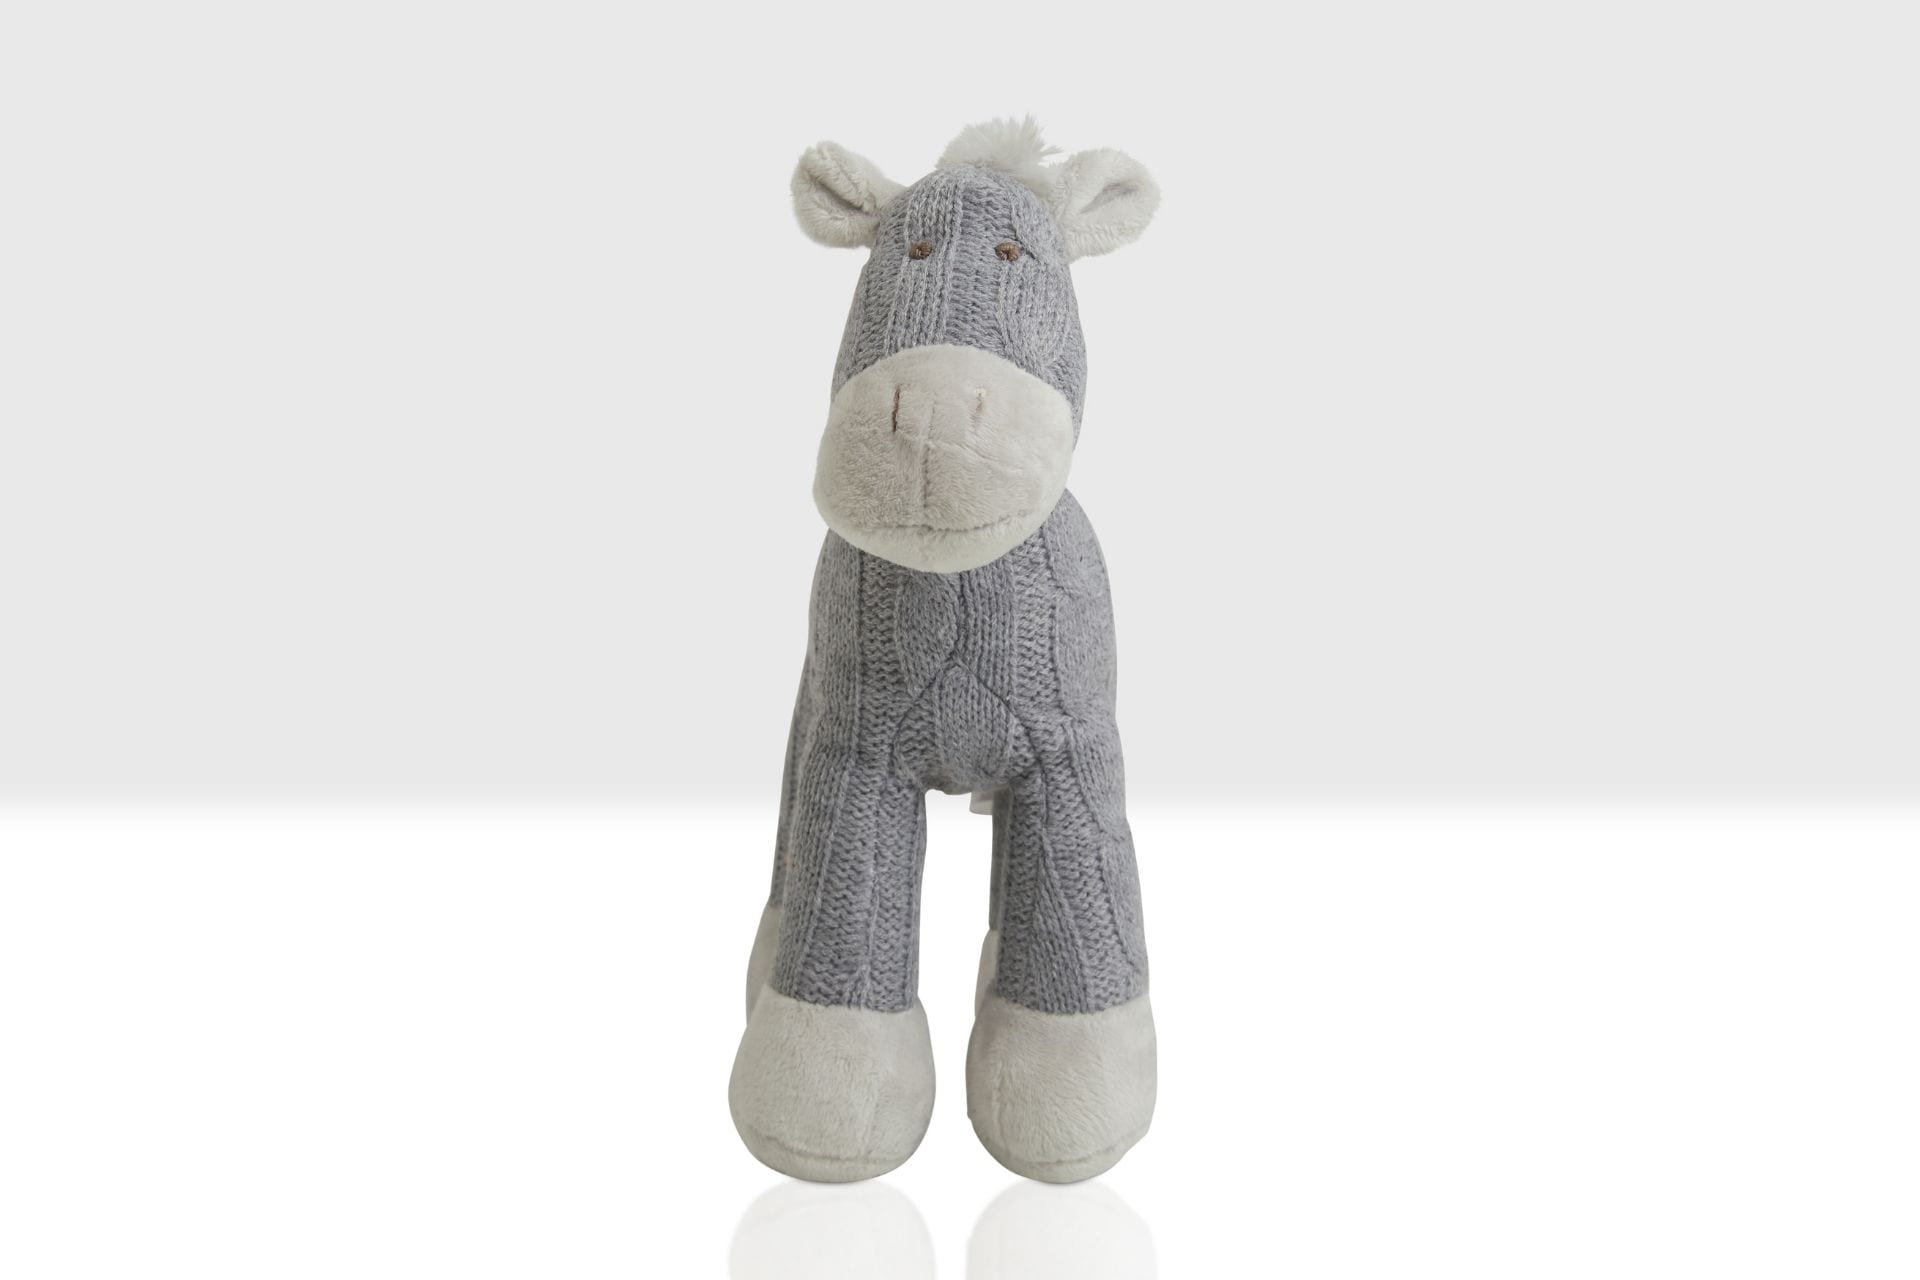 Boots the Horse Soft Toy